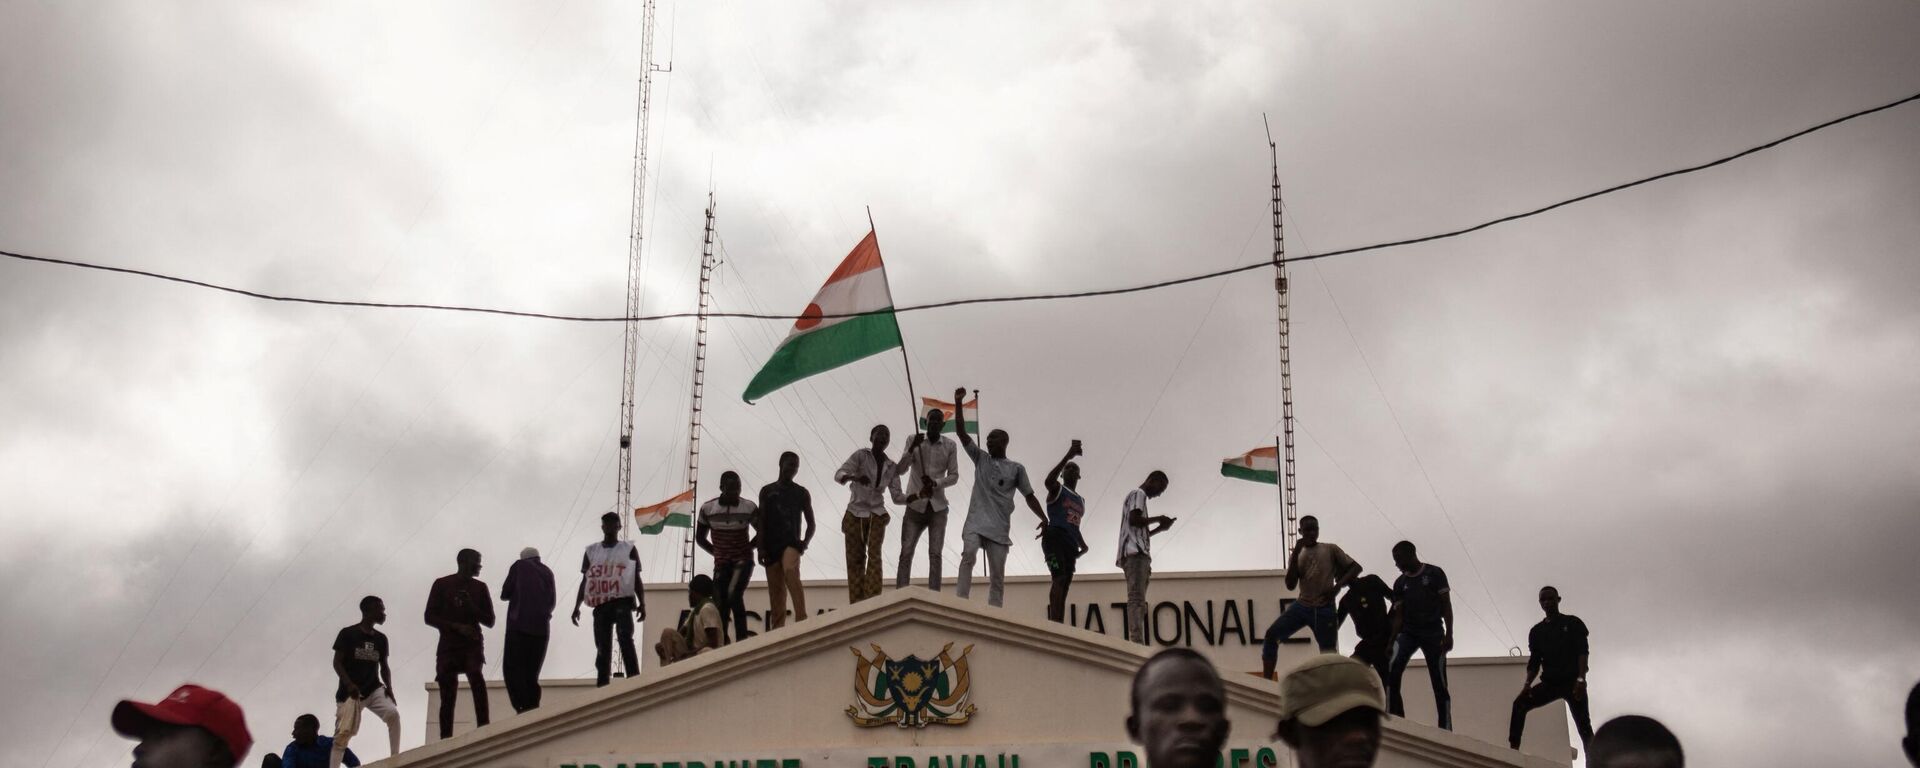 Protesters hold a Niger flag during a demonstration on independence day in Niamey on August 3, 2023. Hundreds of people backing the coup in Niger gathered on August 3, 2023 for a mass rally in the capital Niamey with some brandishing giant Russian flags. - Sputnik Türkiye, 1920, 31.08.2023